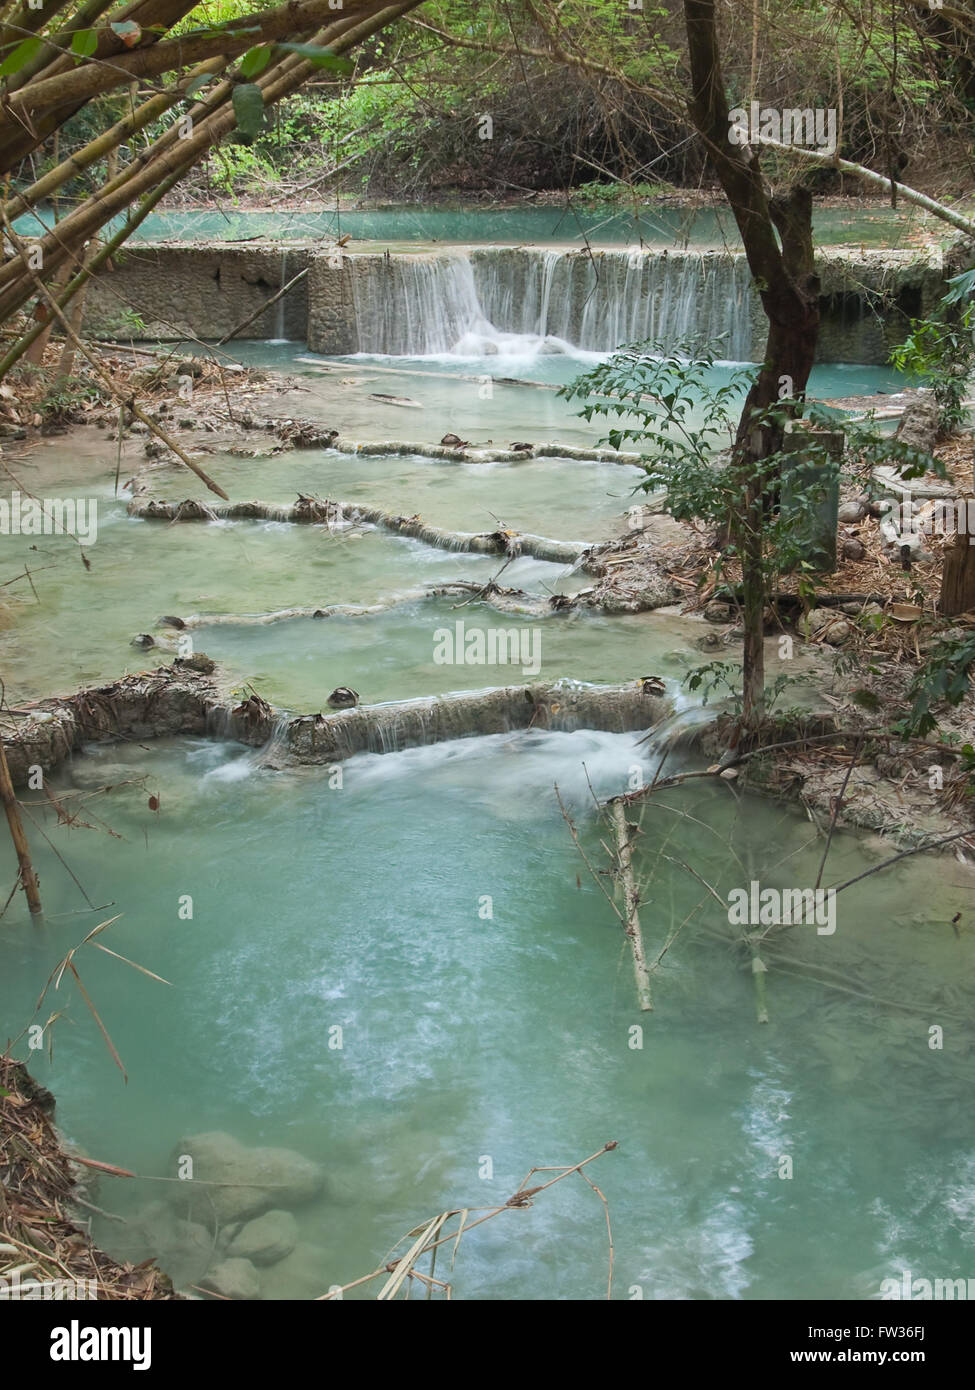 Small waterfall with emerald color water Stock Photo